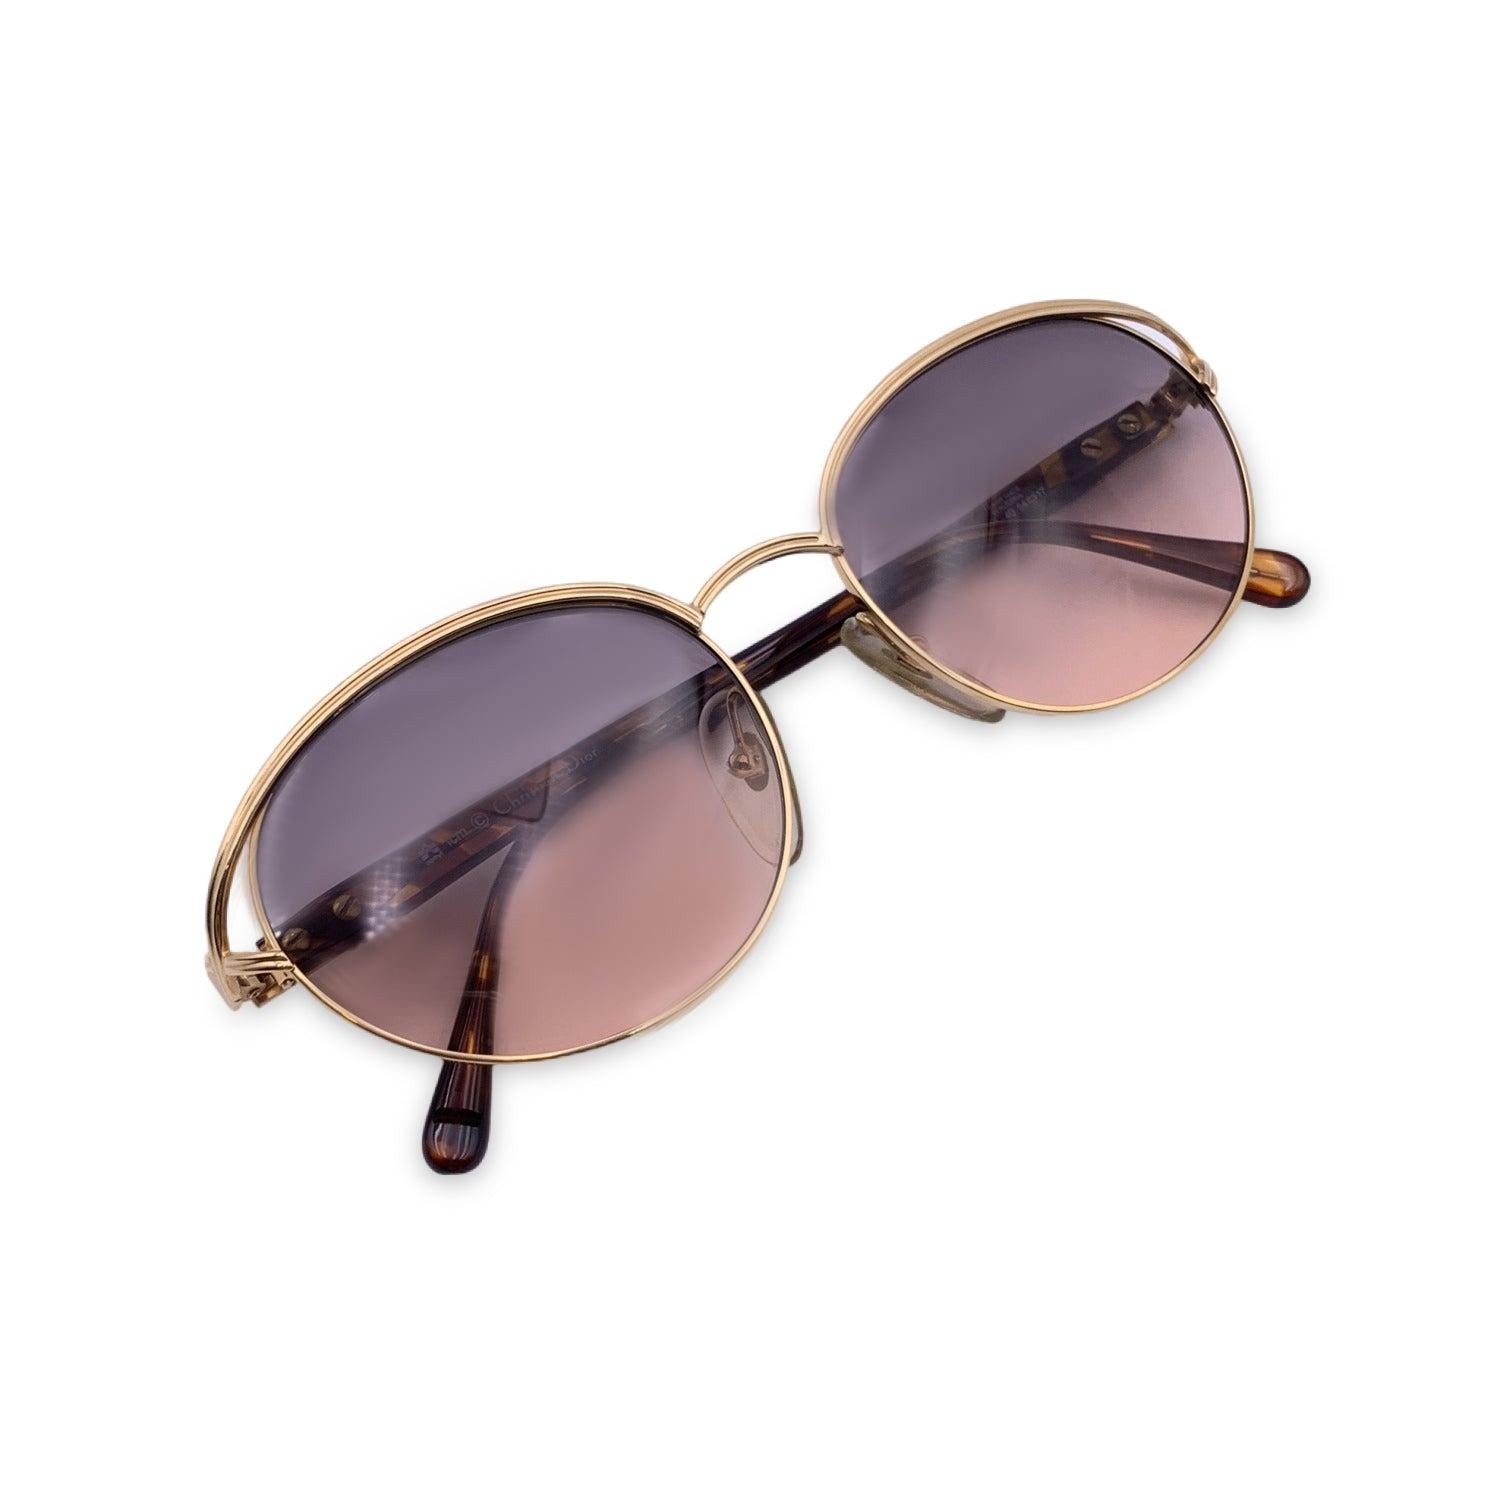 Vintage Christian Dior Women Sunglasses, Mod. 2706 40 Optyl. Size: 54/17 135mm. Gold frame, with brown acetate finish on the sides. CD logo con temples . 100% Total UVA/UVB protection. Pink gradient lenses. Details MATERIAL: Metal COLOR: Gold MODEL: